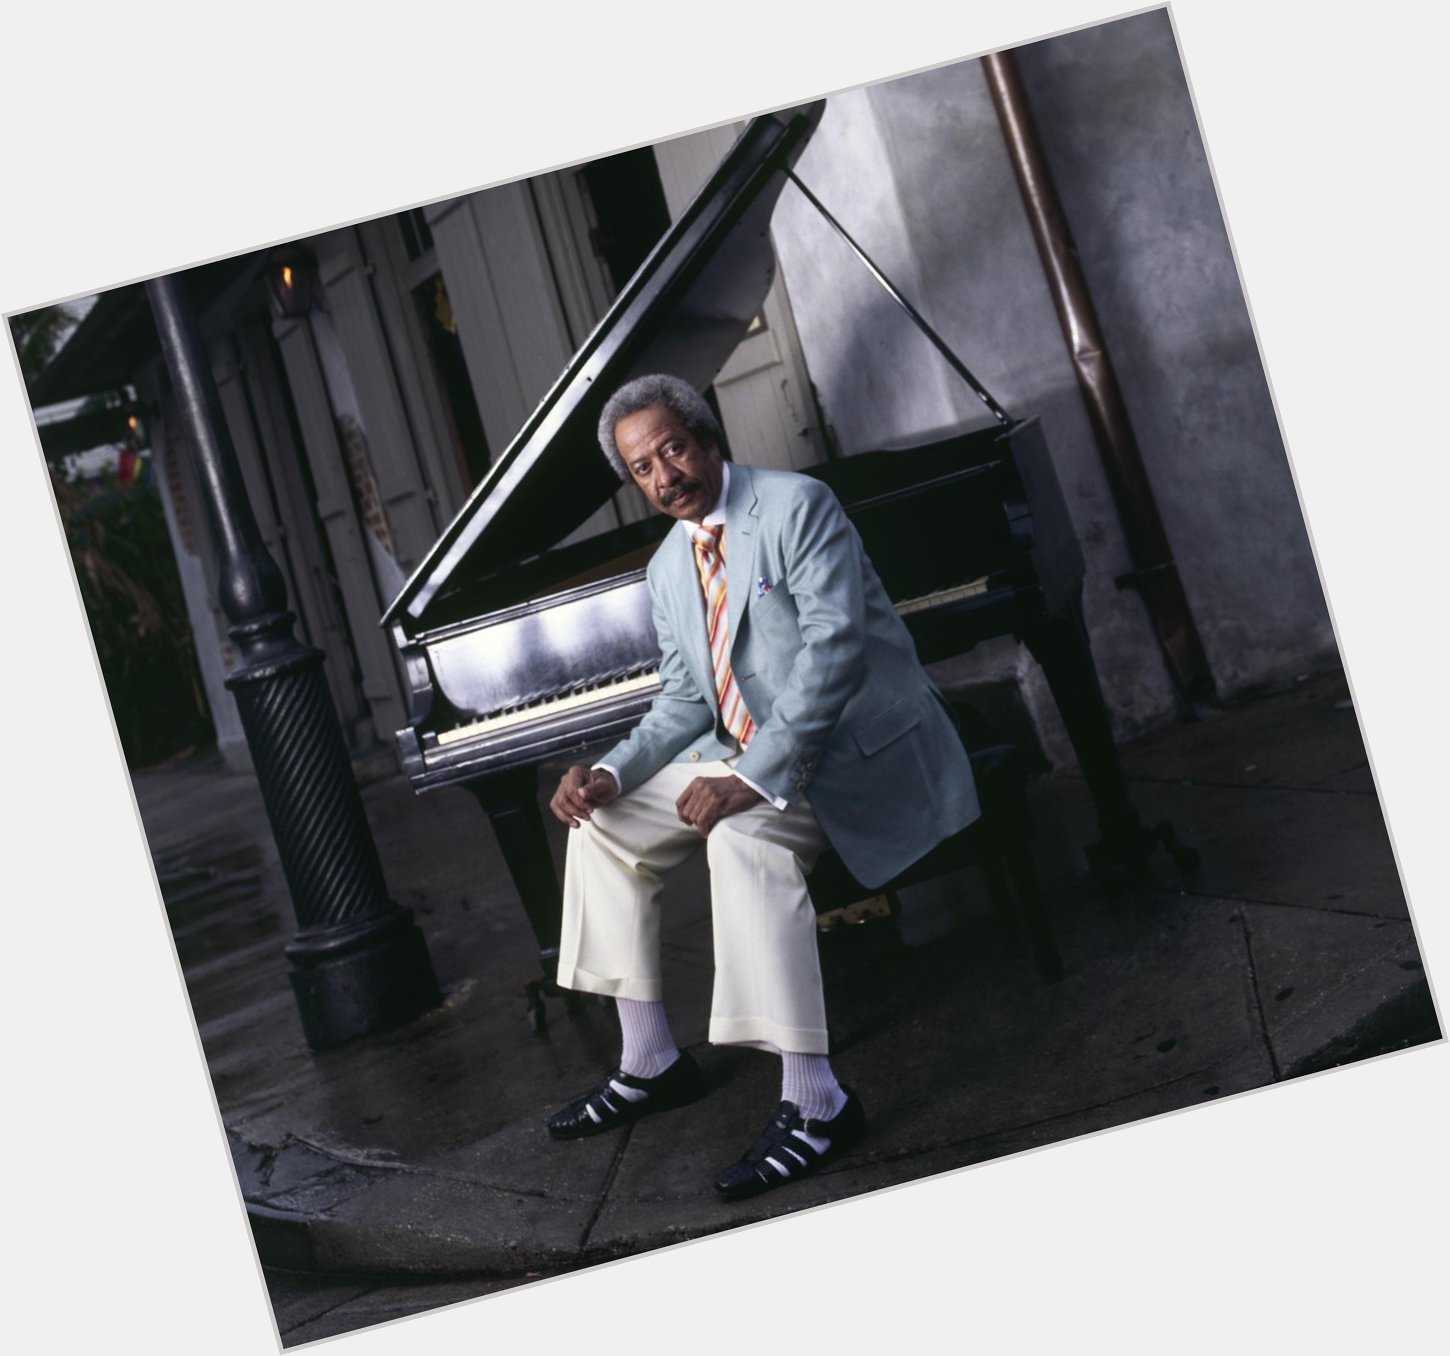 Happy Birthday, Allen Toussaint! A music icon of New Orleans R&B and a man, who just has style. 